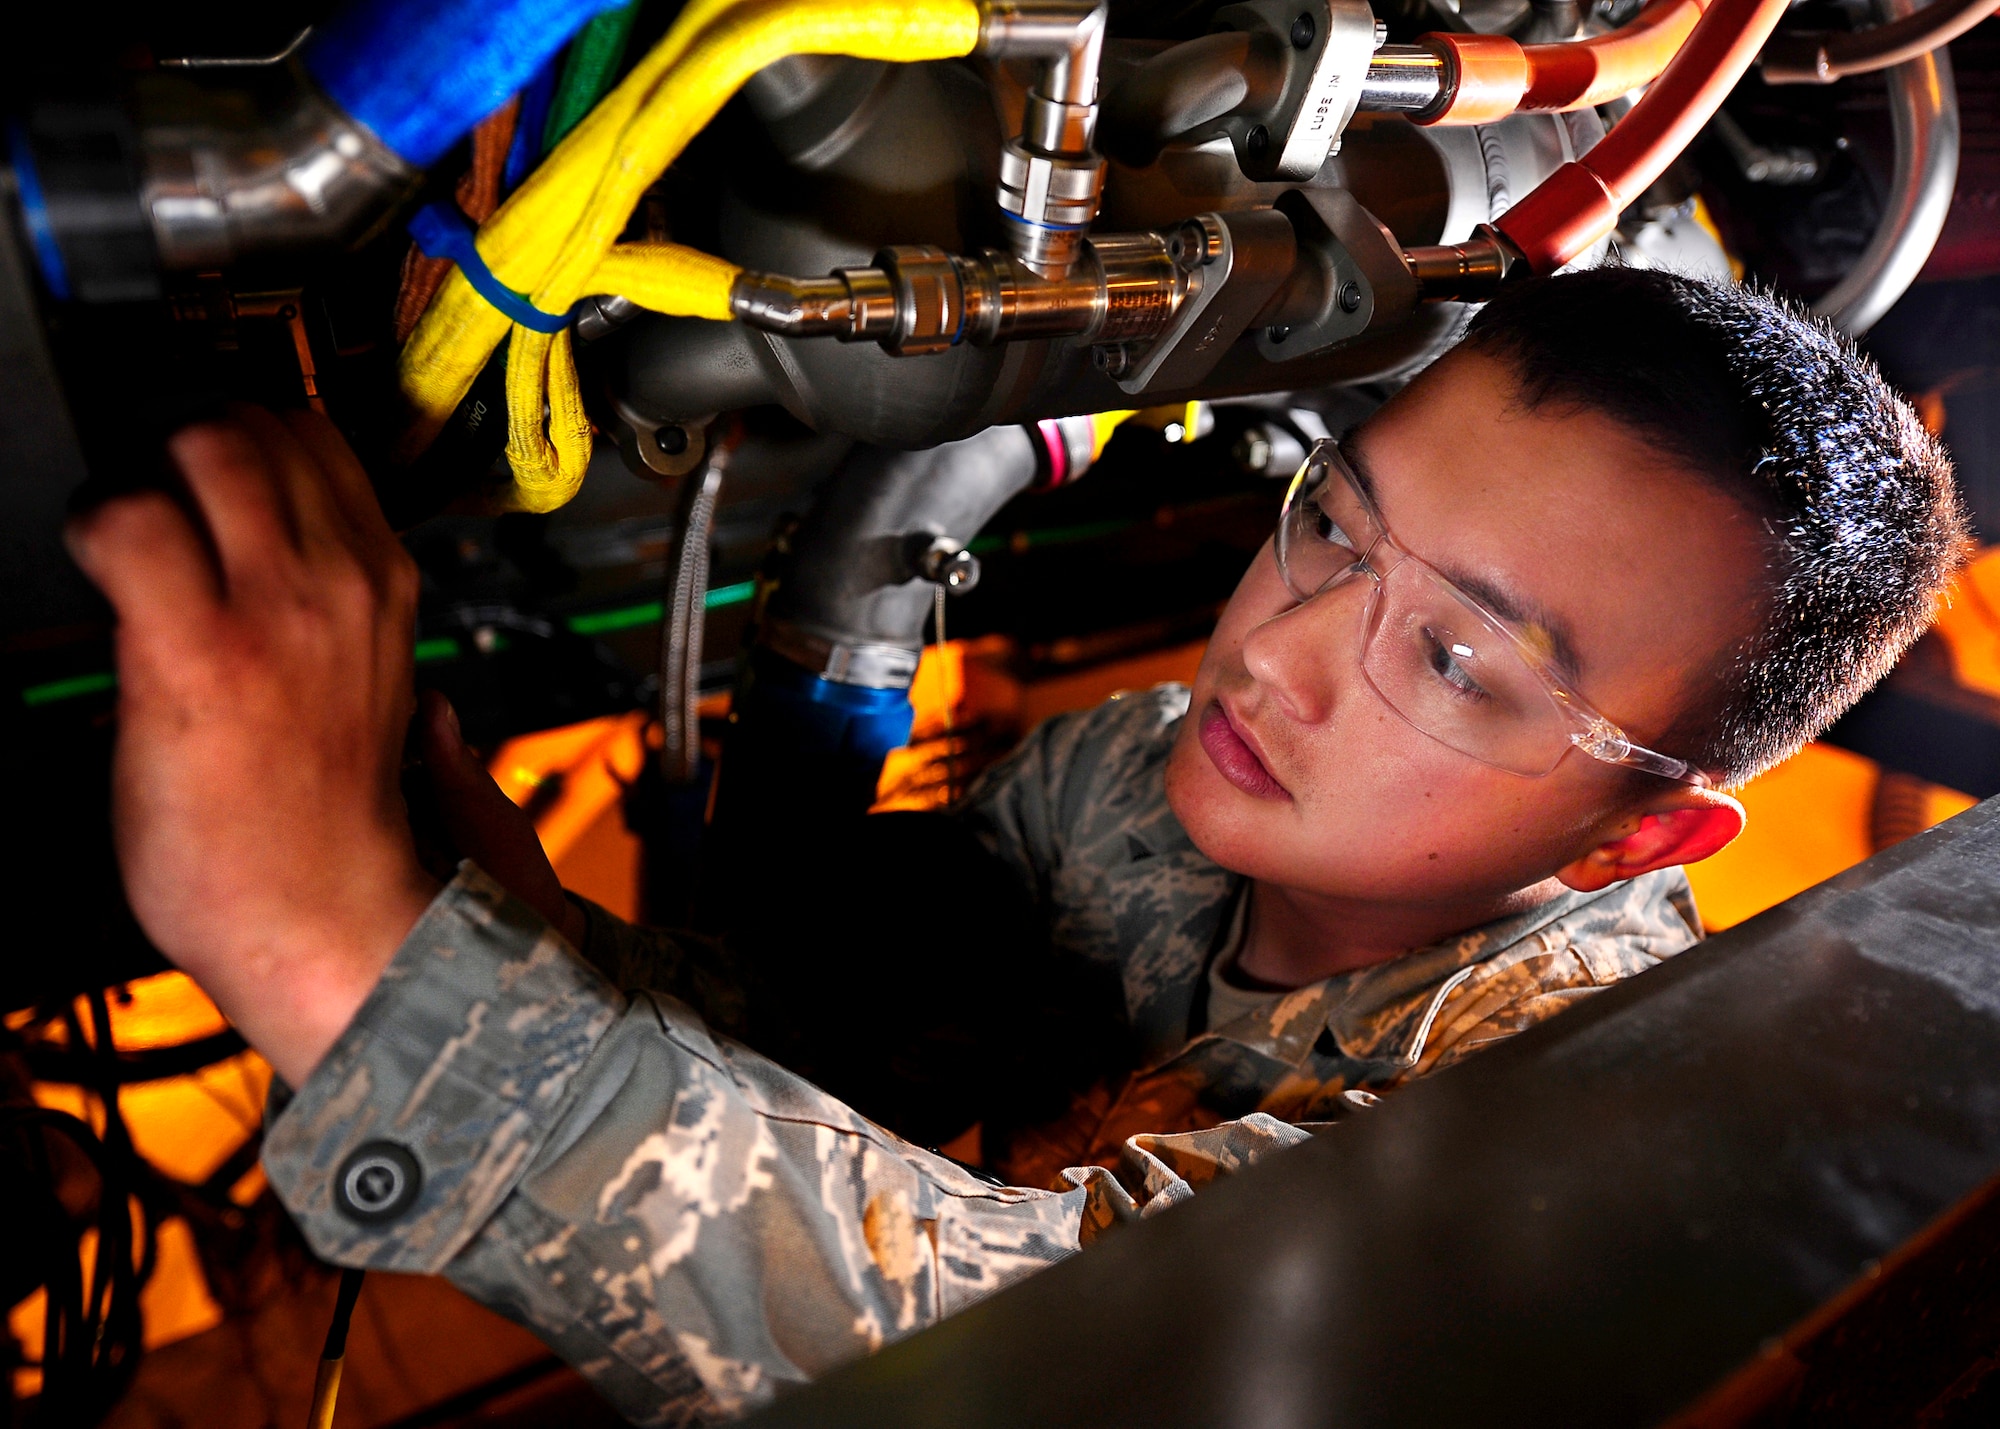 Senior Airman Steven Holland, a Jet Engine Test Facility Journeyman, performs a pre run inspection while testing the engine of an F-22 Raptor. SrA Holland is a member of the 49th Maintenance Squadron and is activley persuing a Federal Aviation Administration Air Frame and Power plant license. (U.S. Air Force Photo/TSgt Chris Flahive)